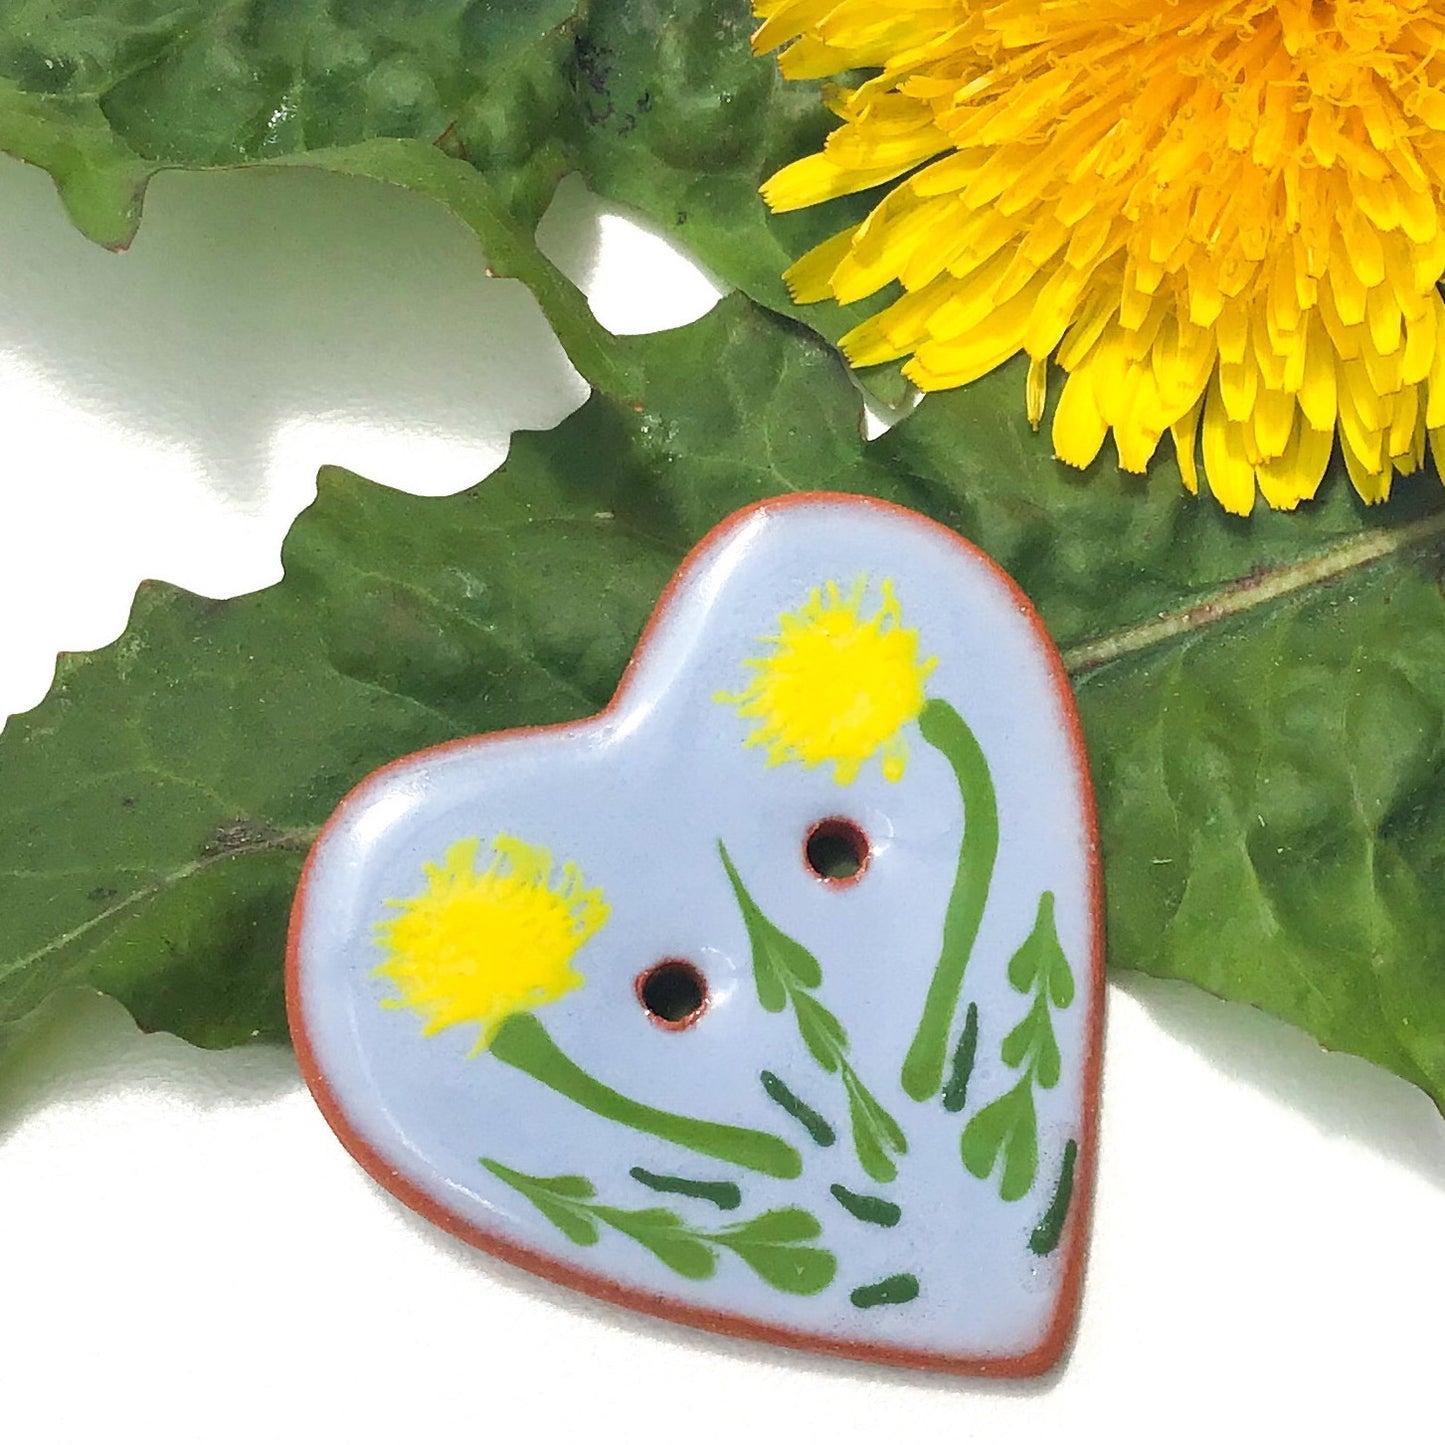 "A Weed is a Flower" Heart Button - Blue Ceramic Heart Button with Dandelions  - 1 3/8"